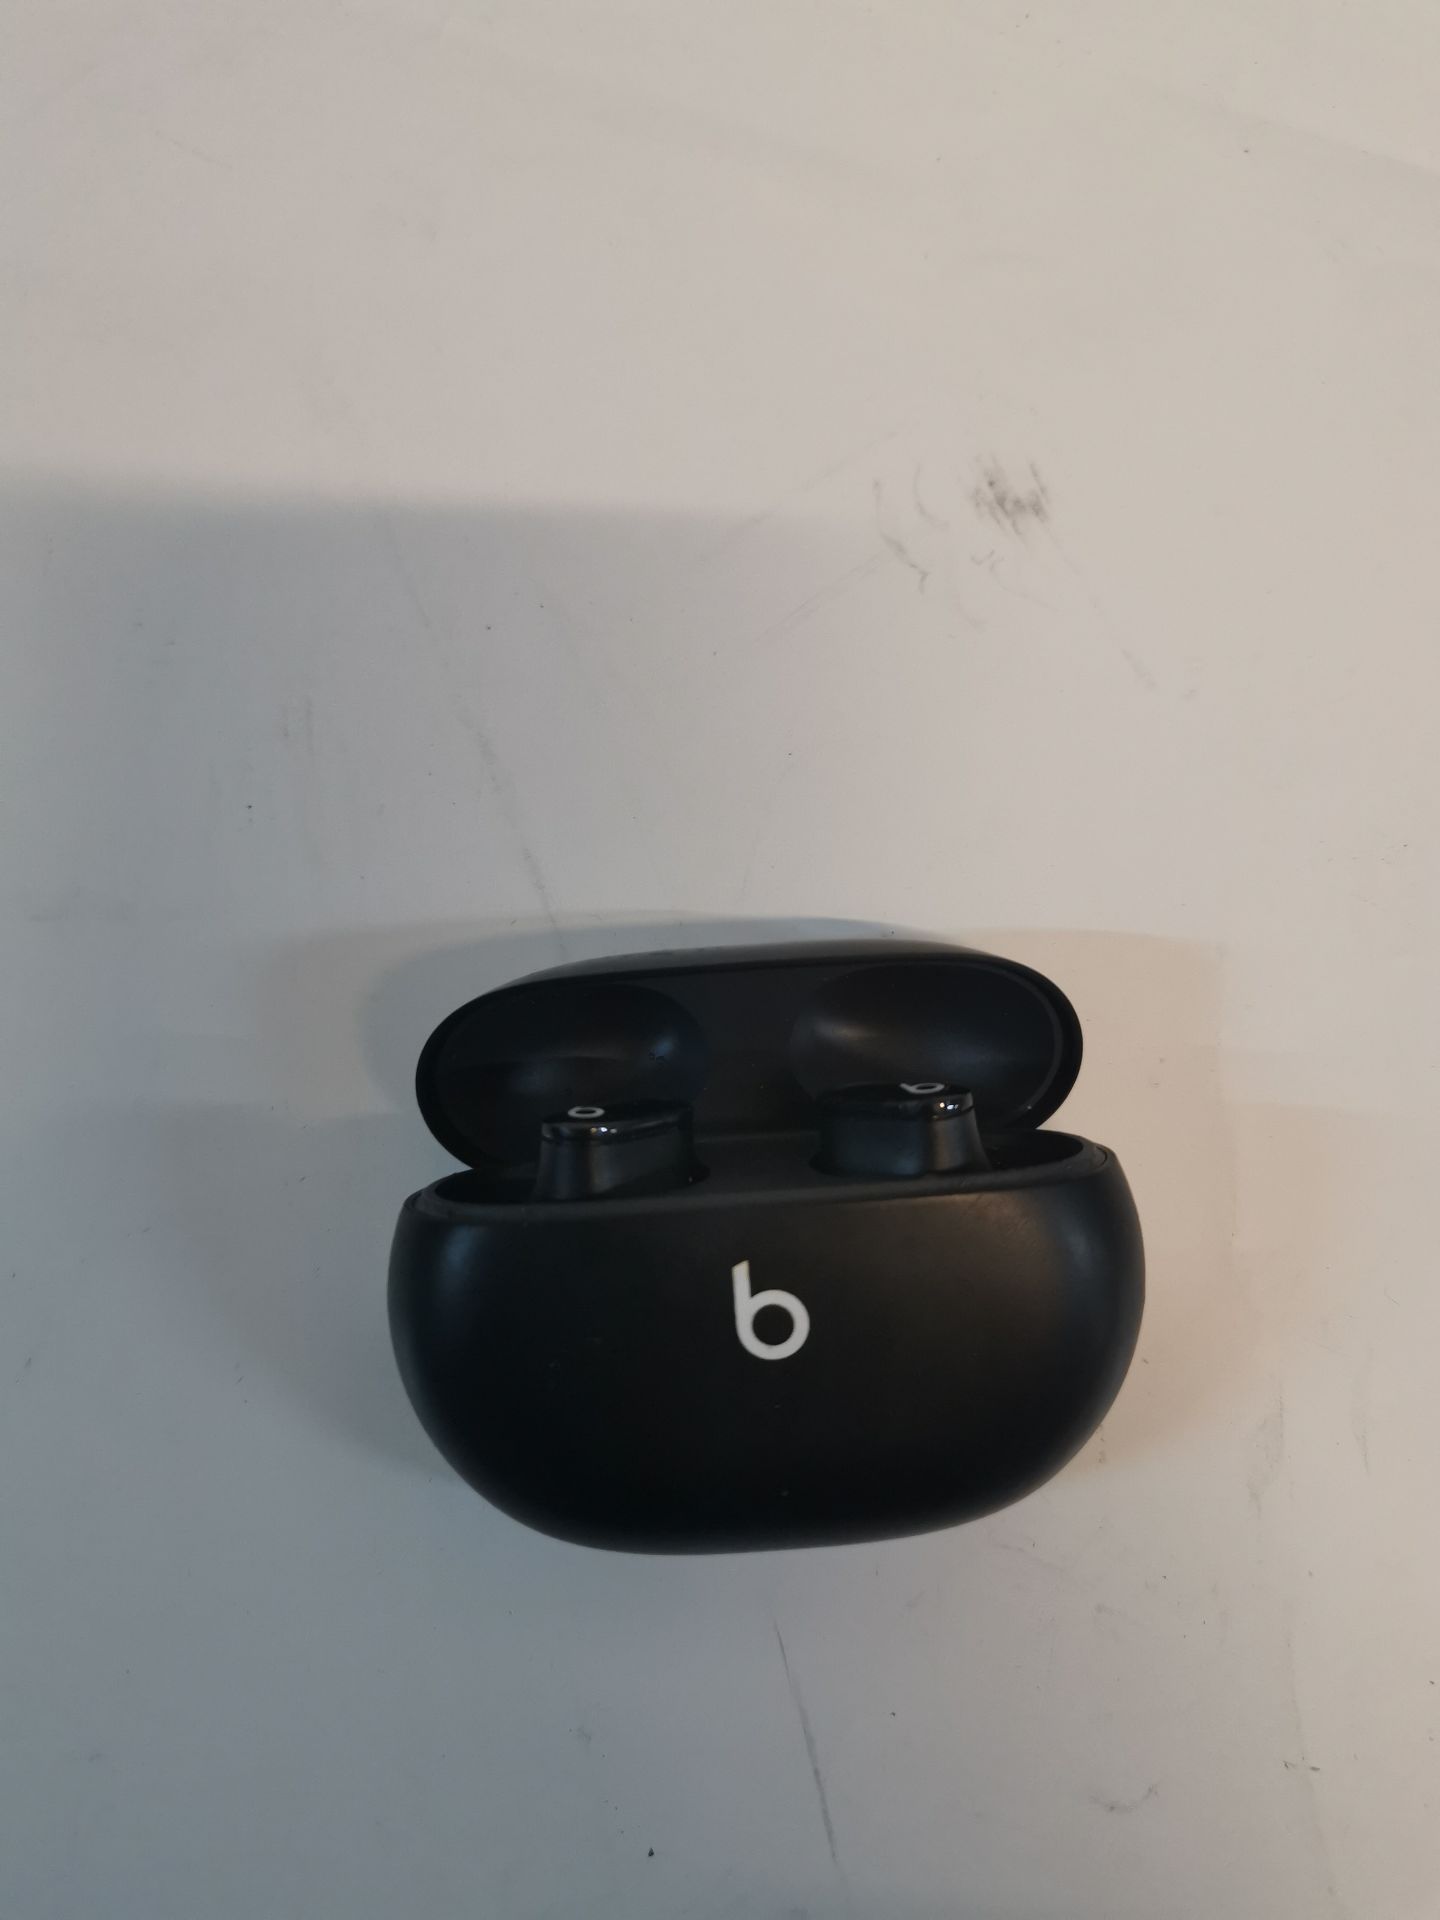 1 BEATS STUDIO BUDS IN BLACK WITH ACTIVE NOISE CANCELLING RRP Â£129.99